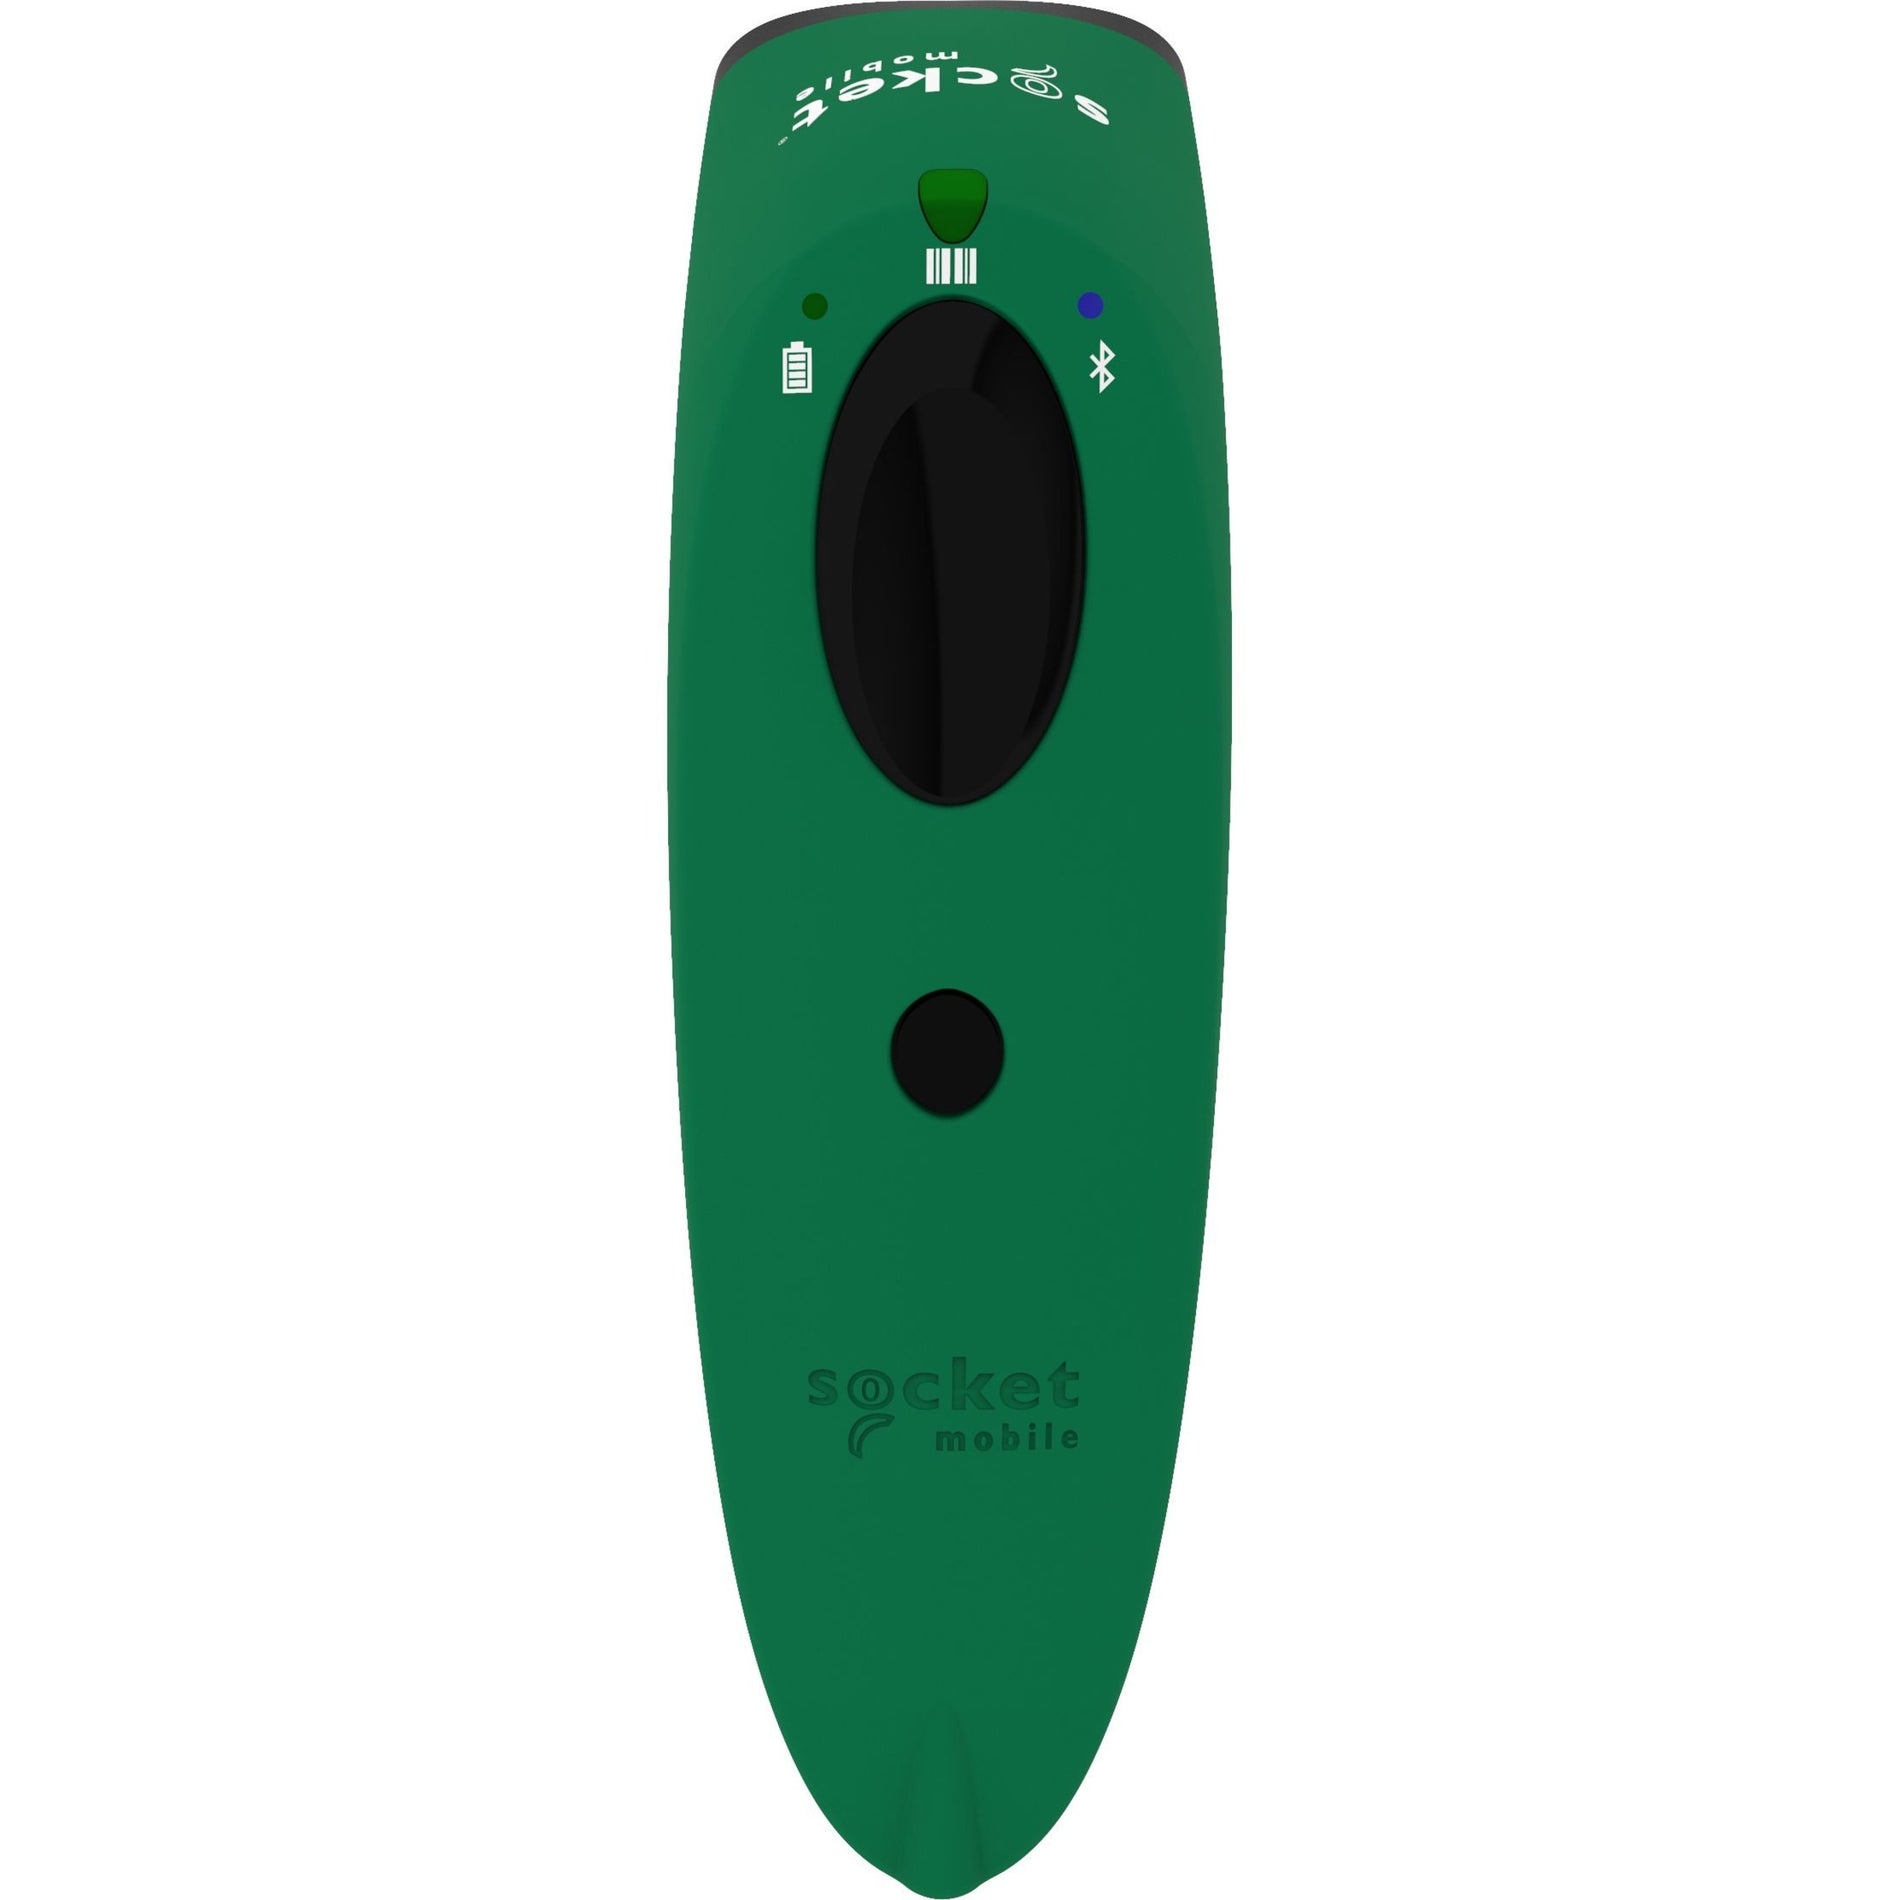 Socket Mobile CX3980-3037 SocketScan S720 Linear Barcode Plus QR Code Reader, Green - Wireless Handheld Scanner for Transportation, Ticketing, Hospitality, Inventory, and More